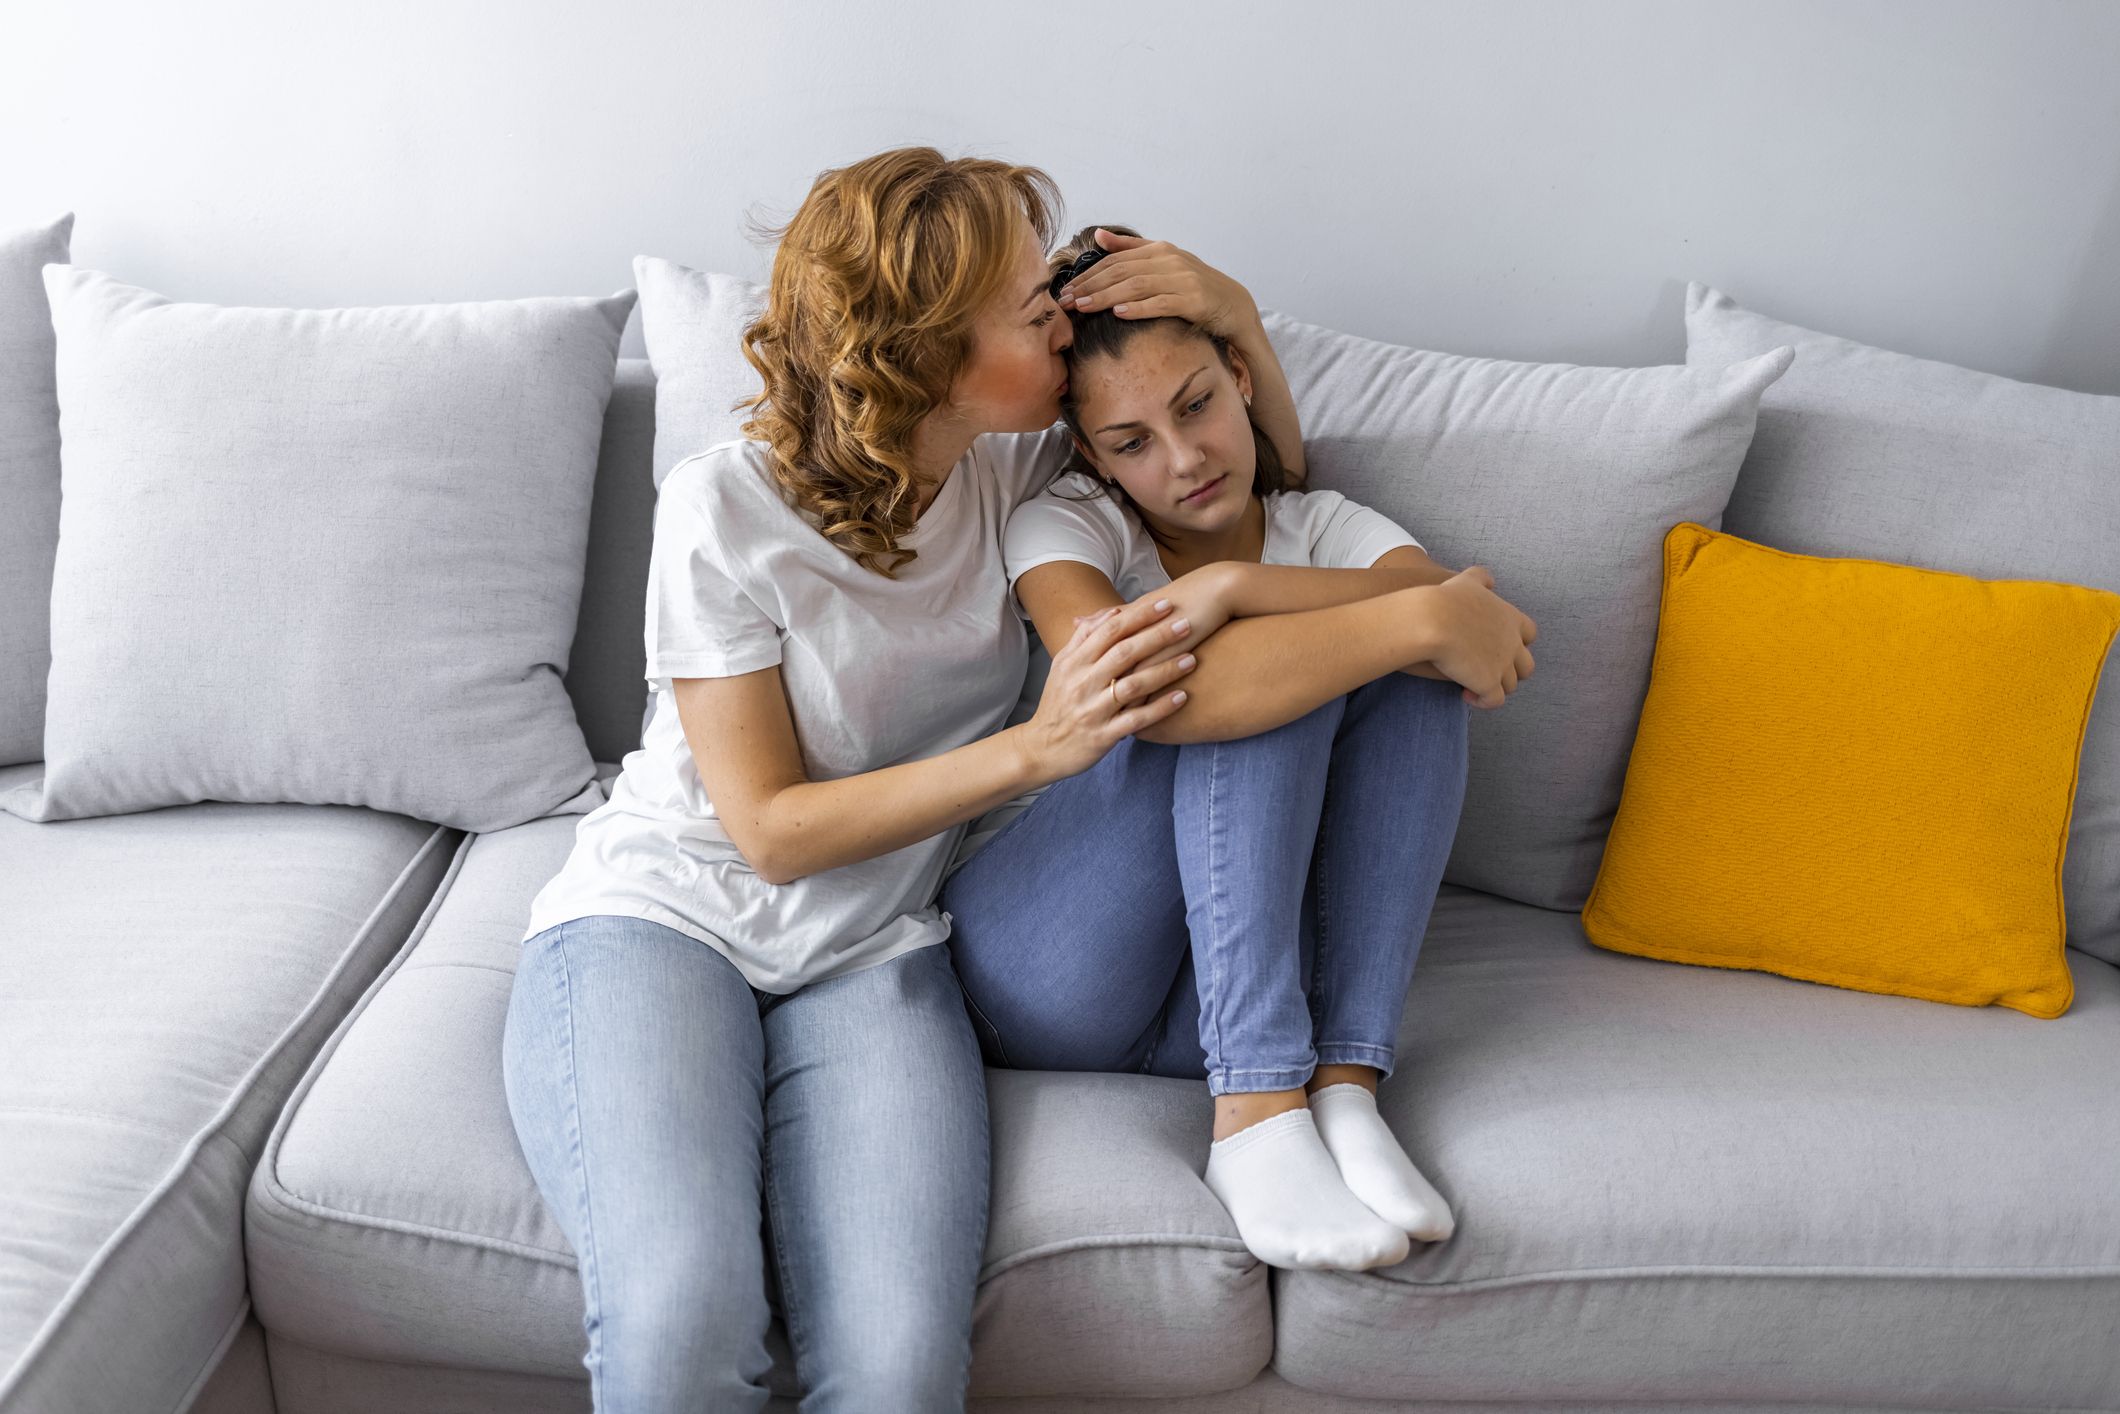 A caring mother hugs and comforts her teenage daughter on the couch